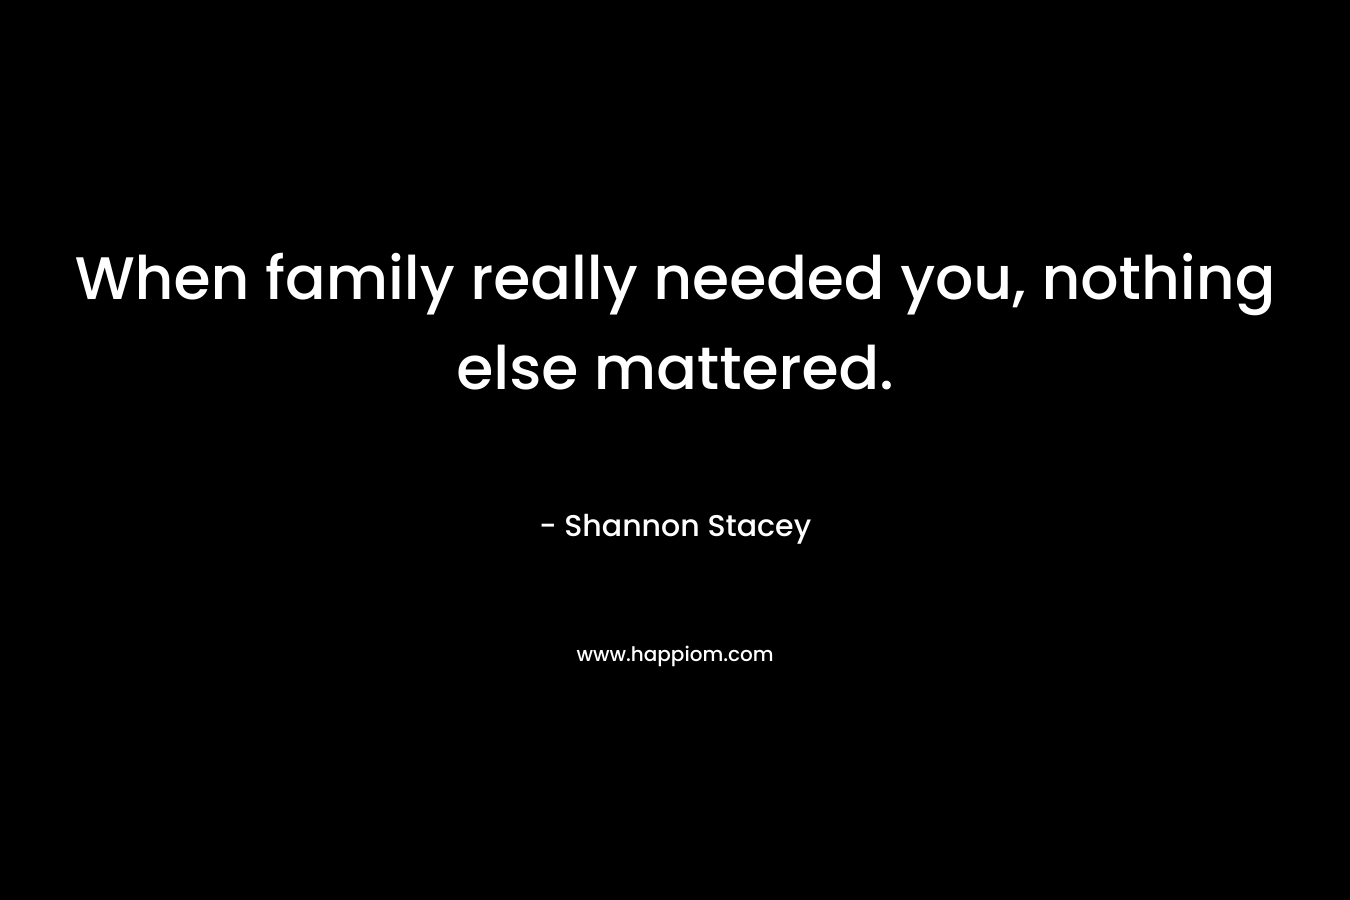 When family really needed you, nothing else mattered.